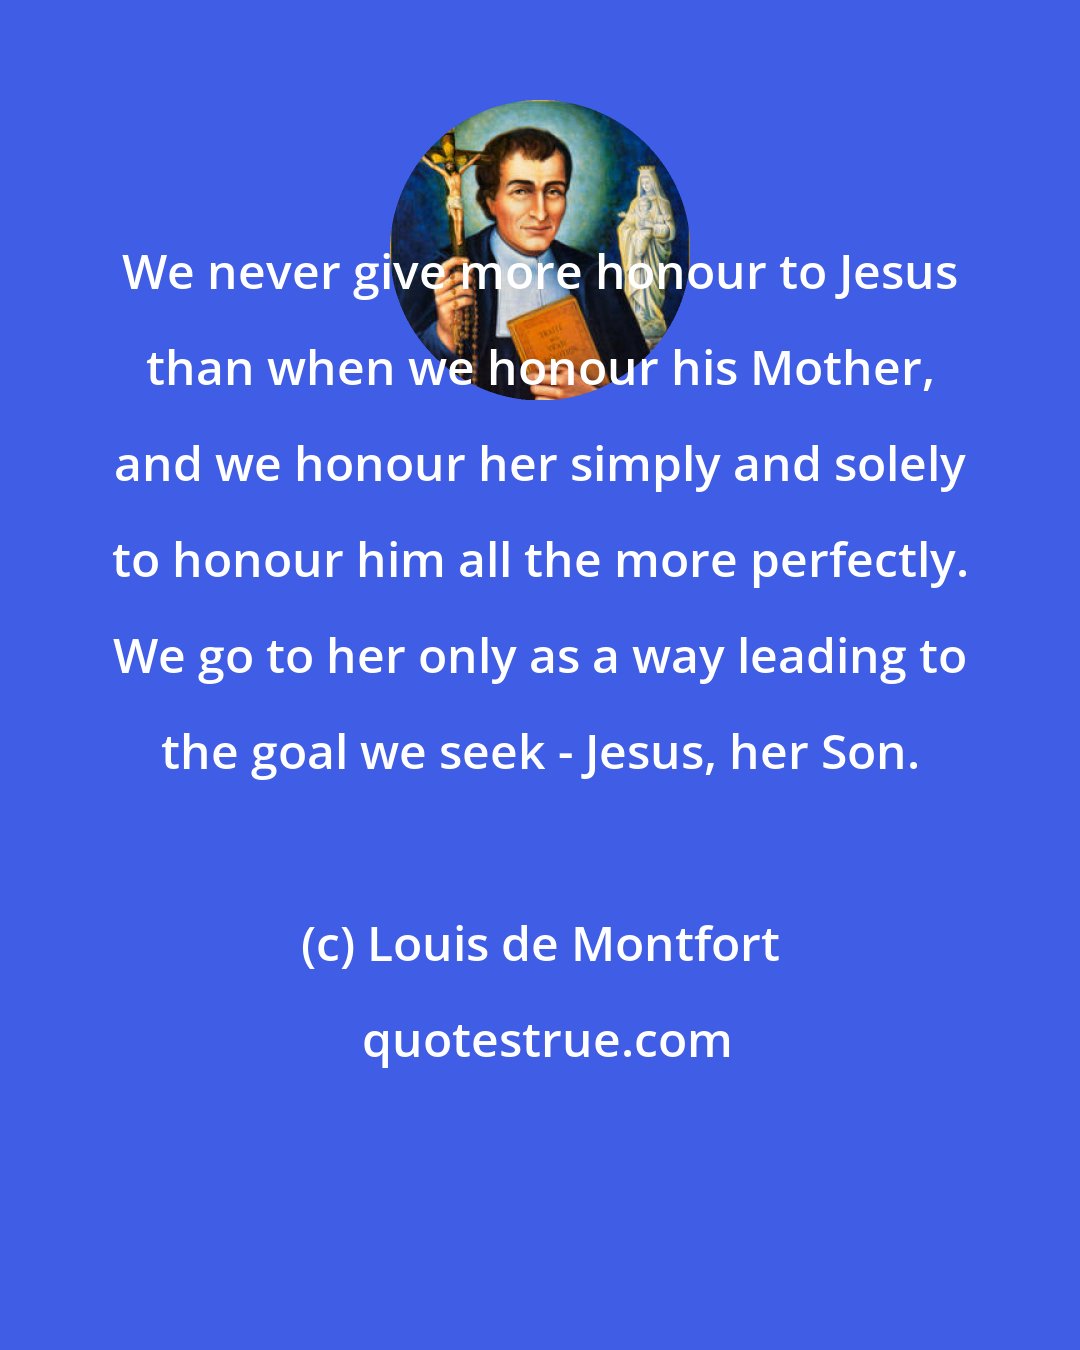 Louis de Montfort: We never give more honour to Jesus than when we honour his Mother, and we honour her simply and solely to honour him all the more perfectly. We go to her only as a way leading to the goal we seek - Jesus, her Son.